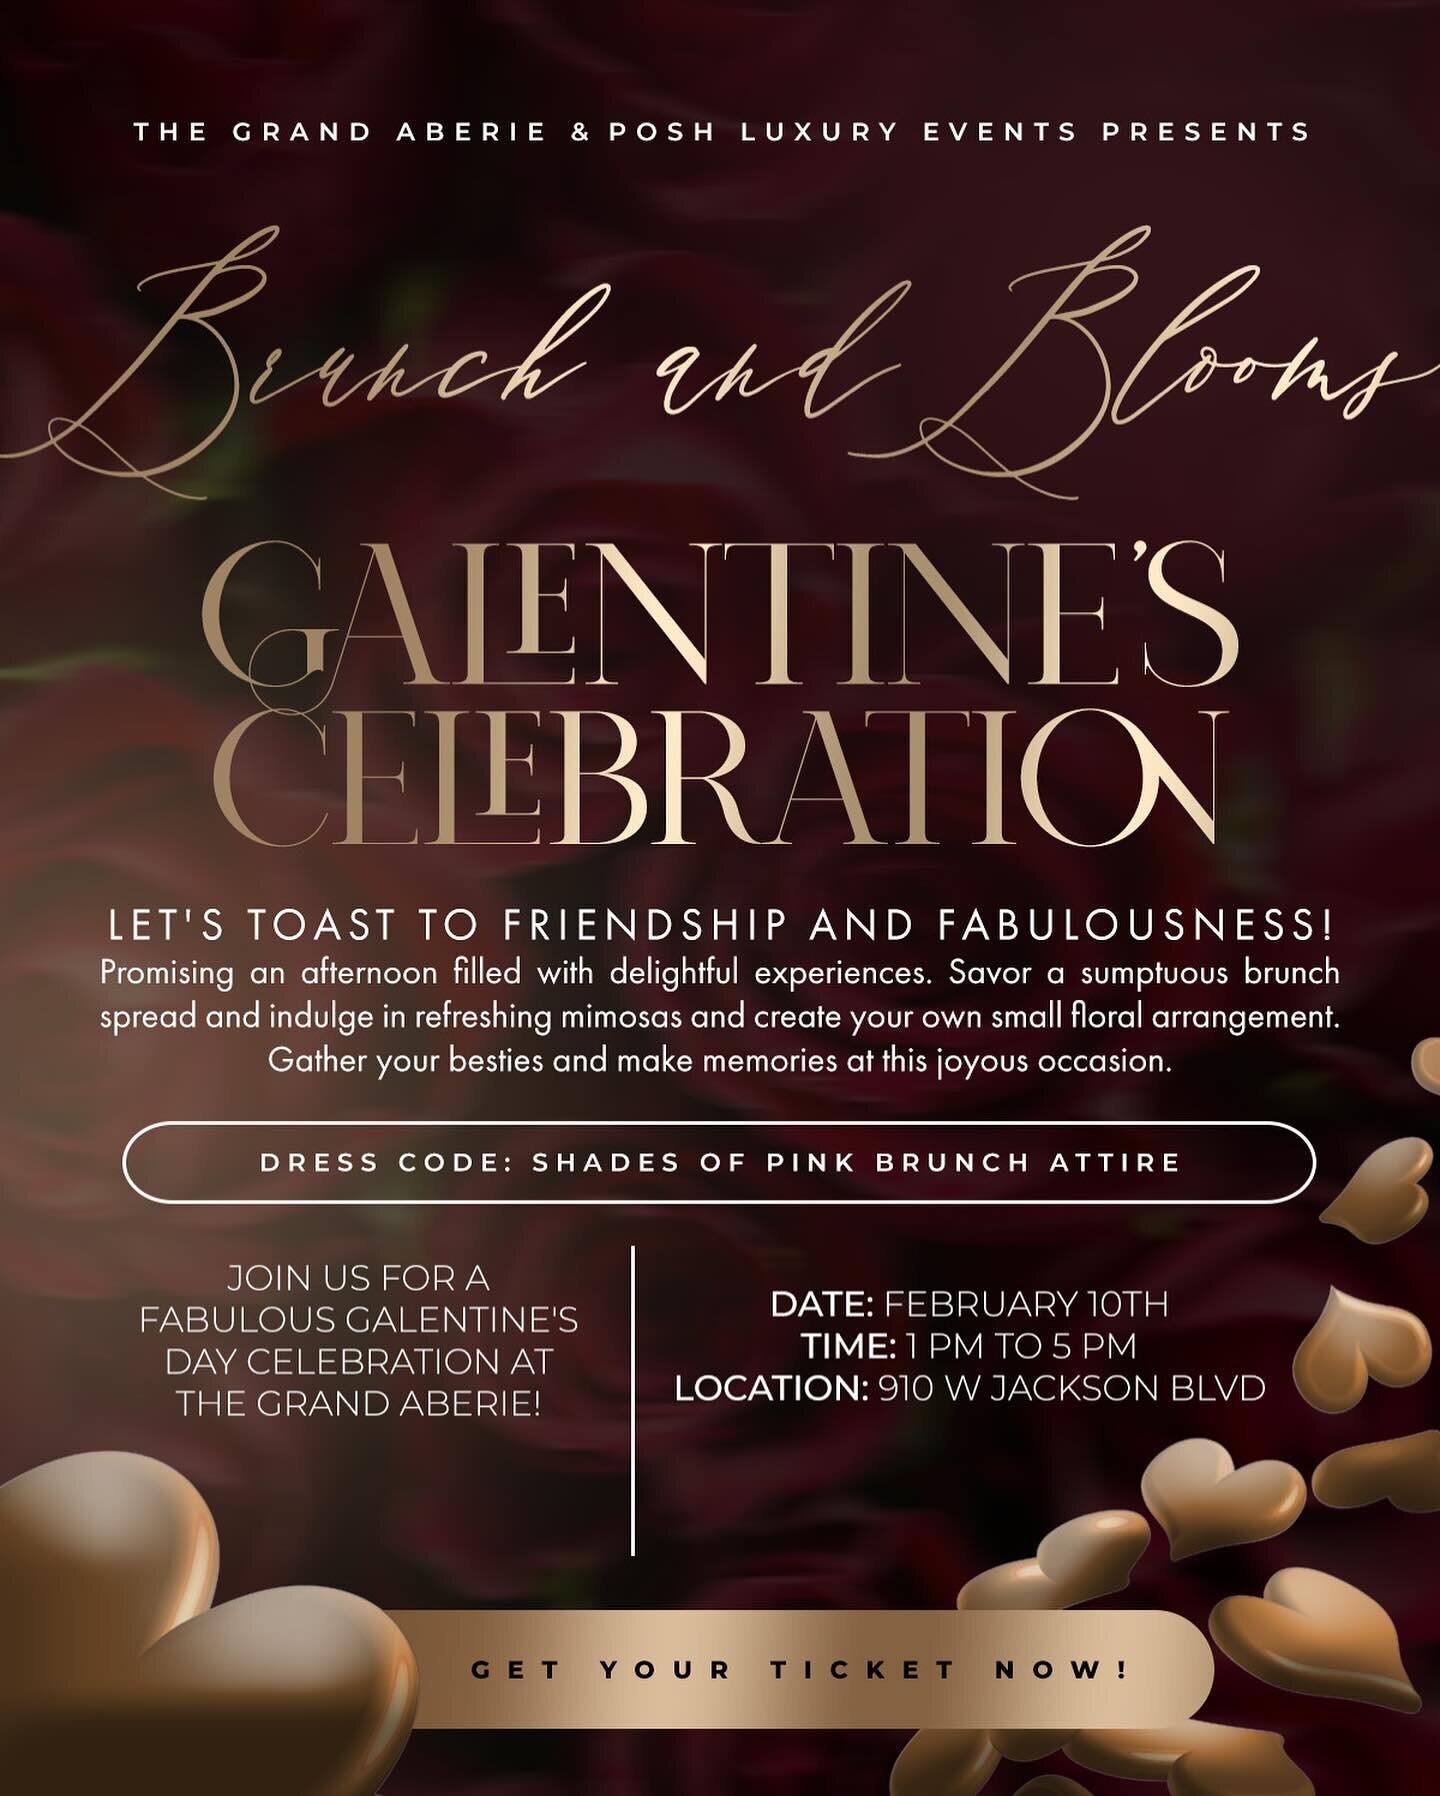 LIMITED SEATING!!!

Grab your besties and come enjoy a dope vibe full of fun, laughter, good food, good drinks, luxury experiences and so much more at The Brunch &amp; Blooms Galentine&rsquo;s Day Celebration hosted by @poshluxuryevents and @thegrand